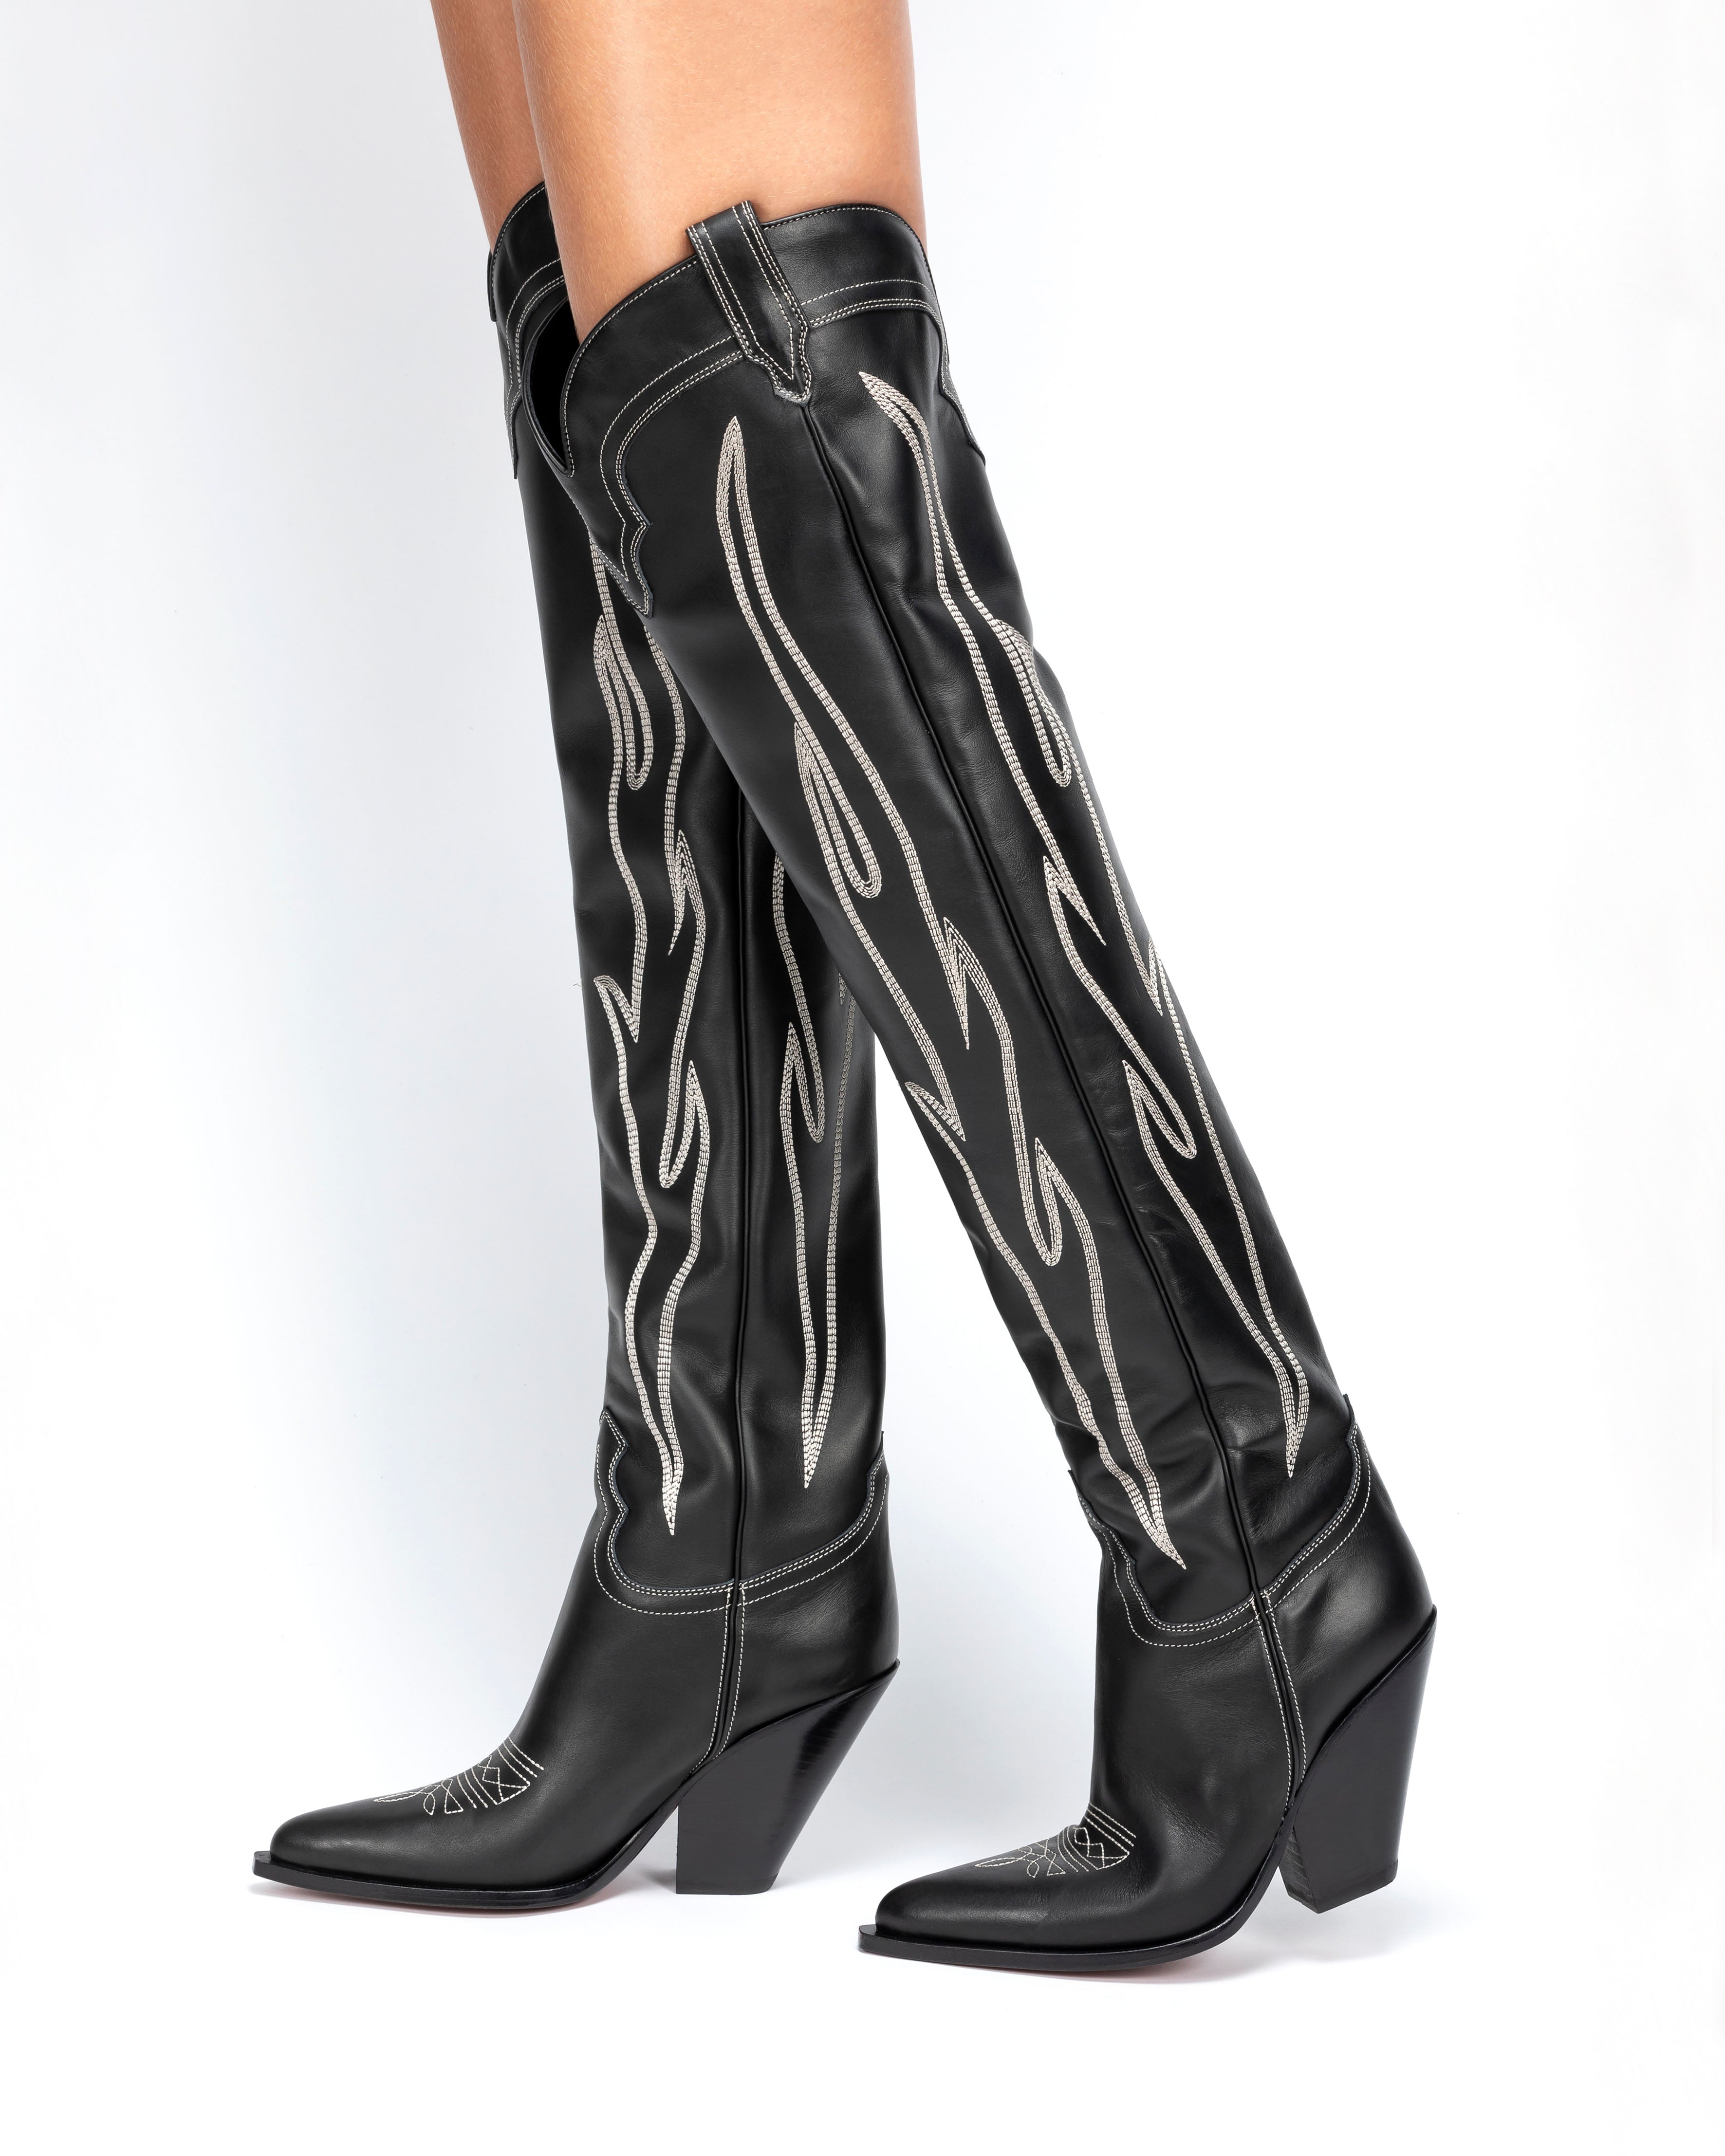 HERMOSA-90-Women_s-Over-The-Knee-Boots-in-Black-Calfskin-Off-White-Embroidery_03